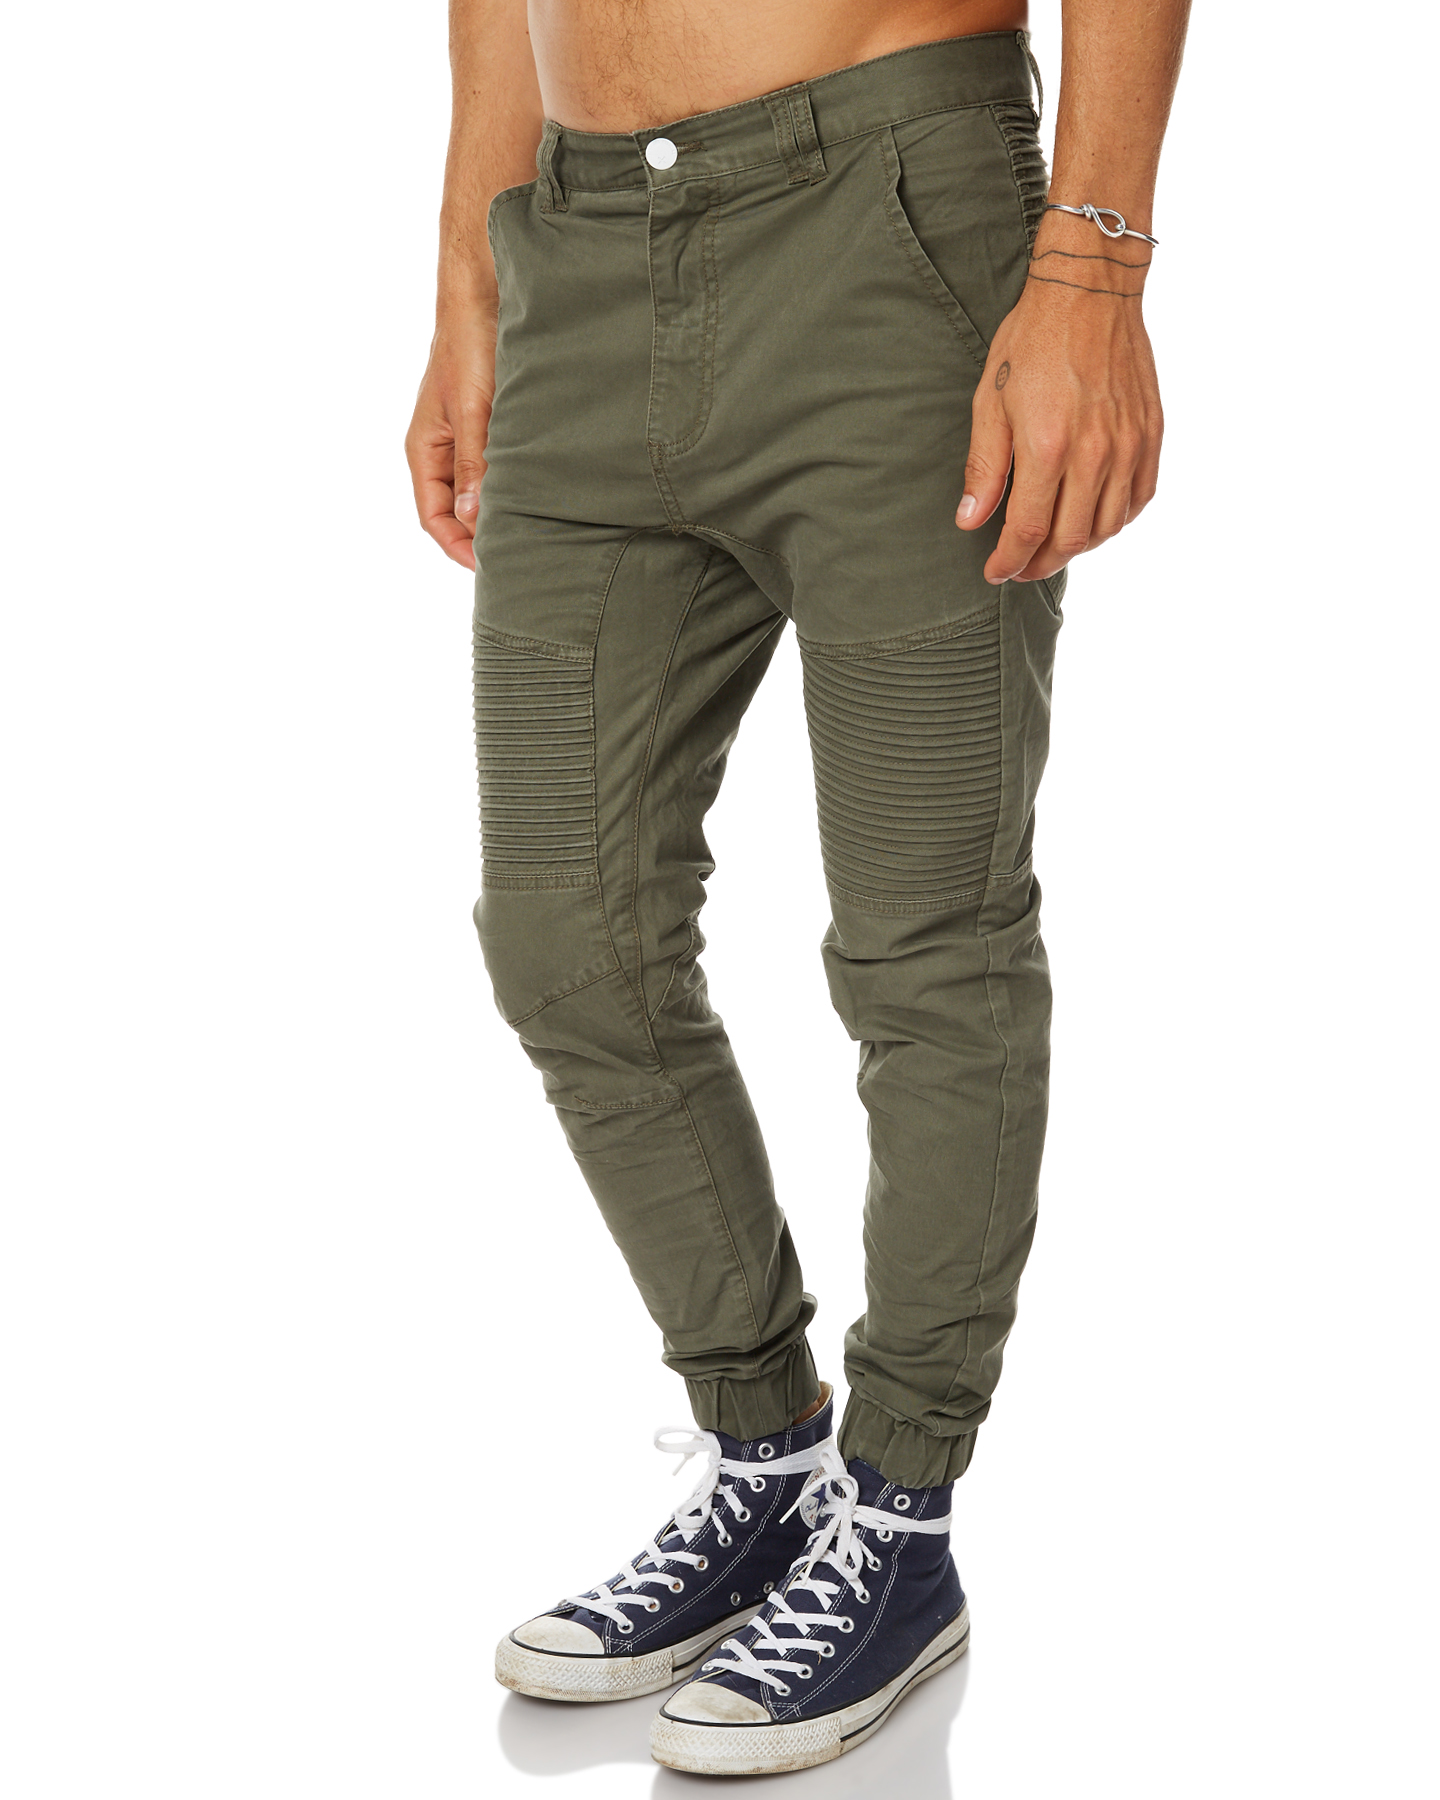 Nena And Pasadena Destroyer Mens Jogger Pant - Apache Green | SurfStitch